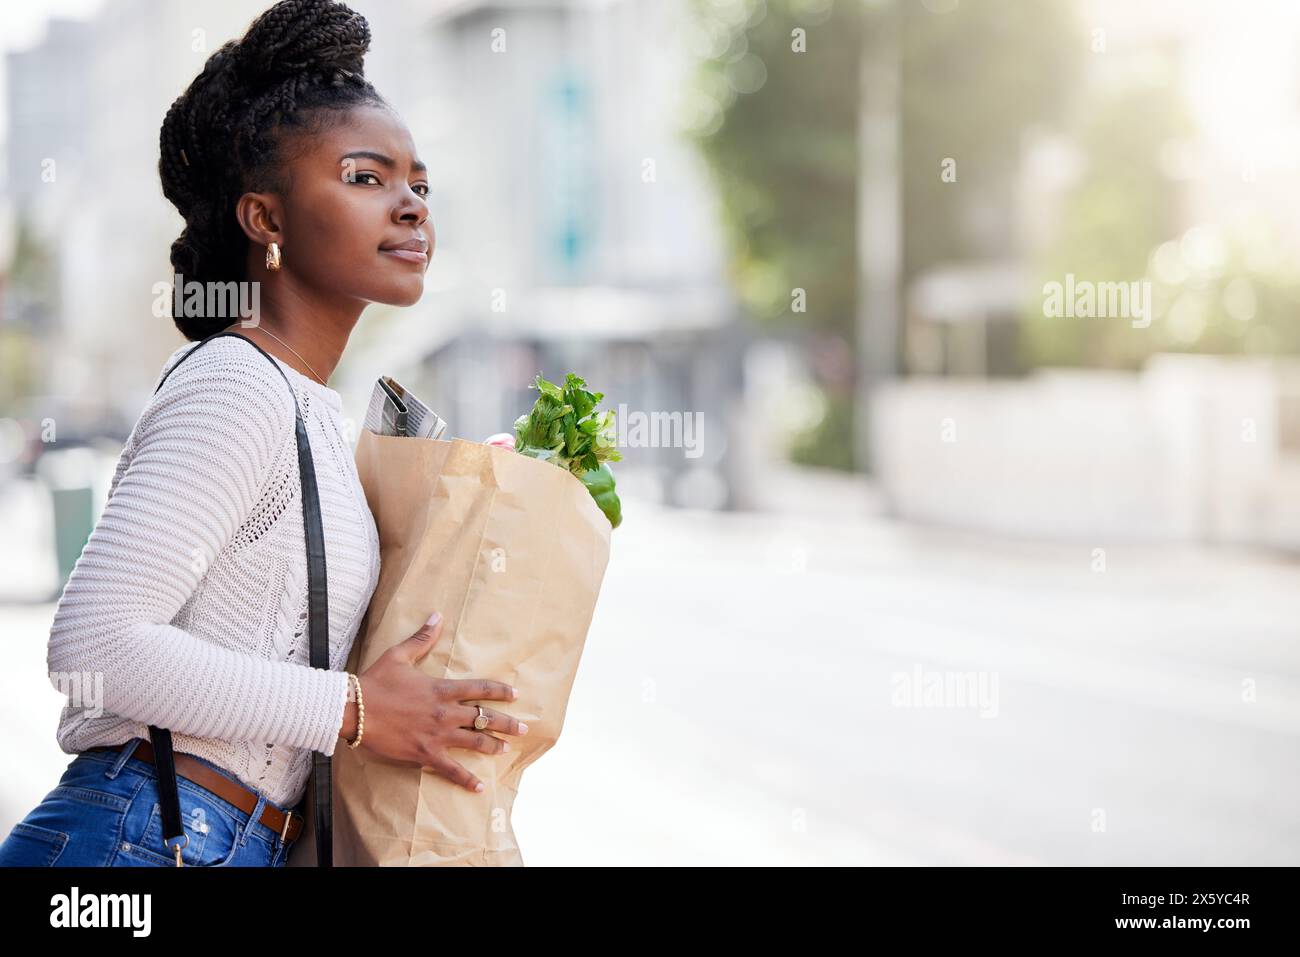 Bag, groceries and black woman for shopping, outside and vegetables for healthy food. Search, transport and travel with organic wellness produce Stock Photo